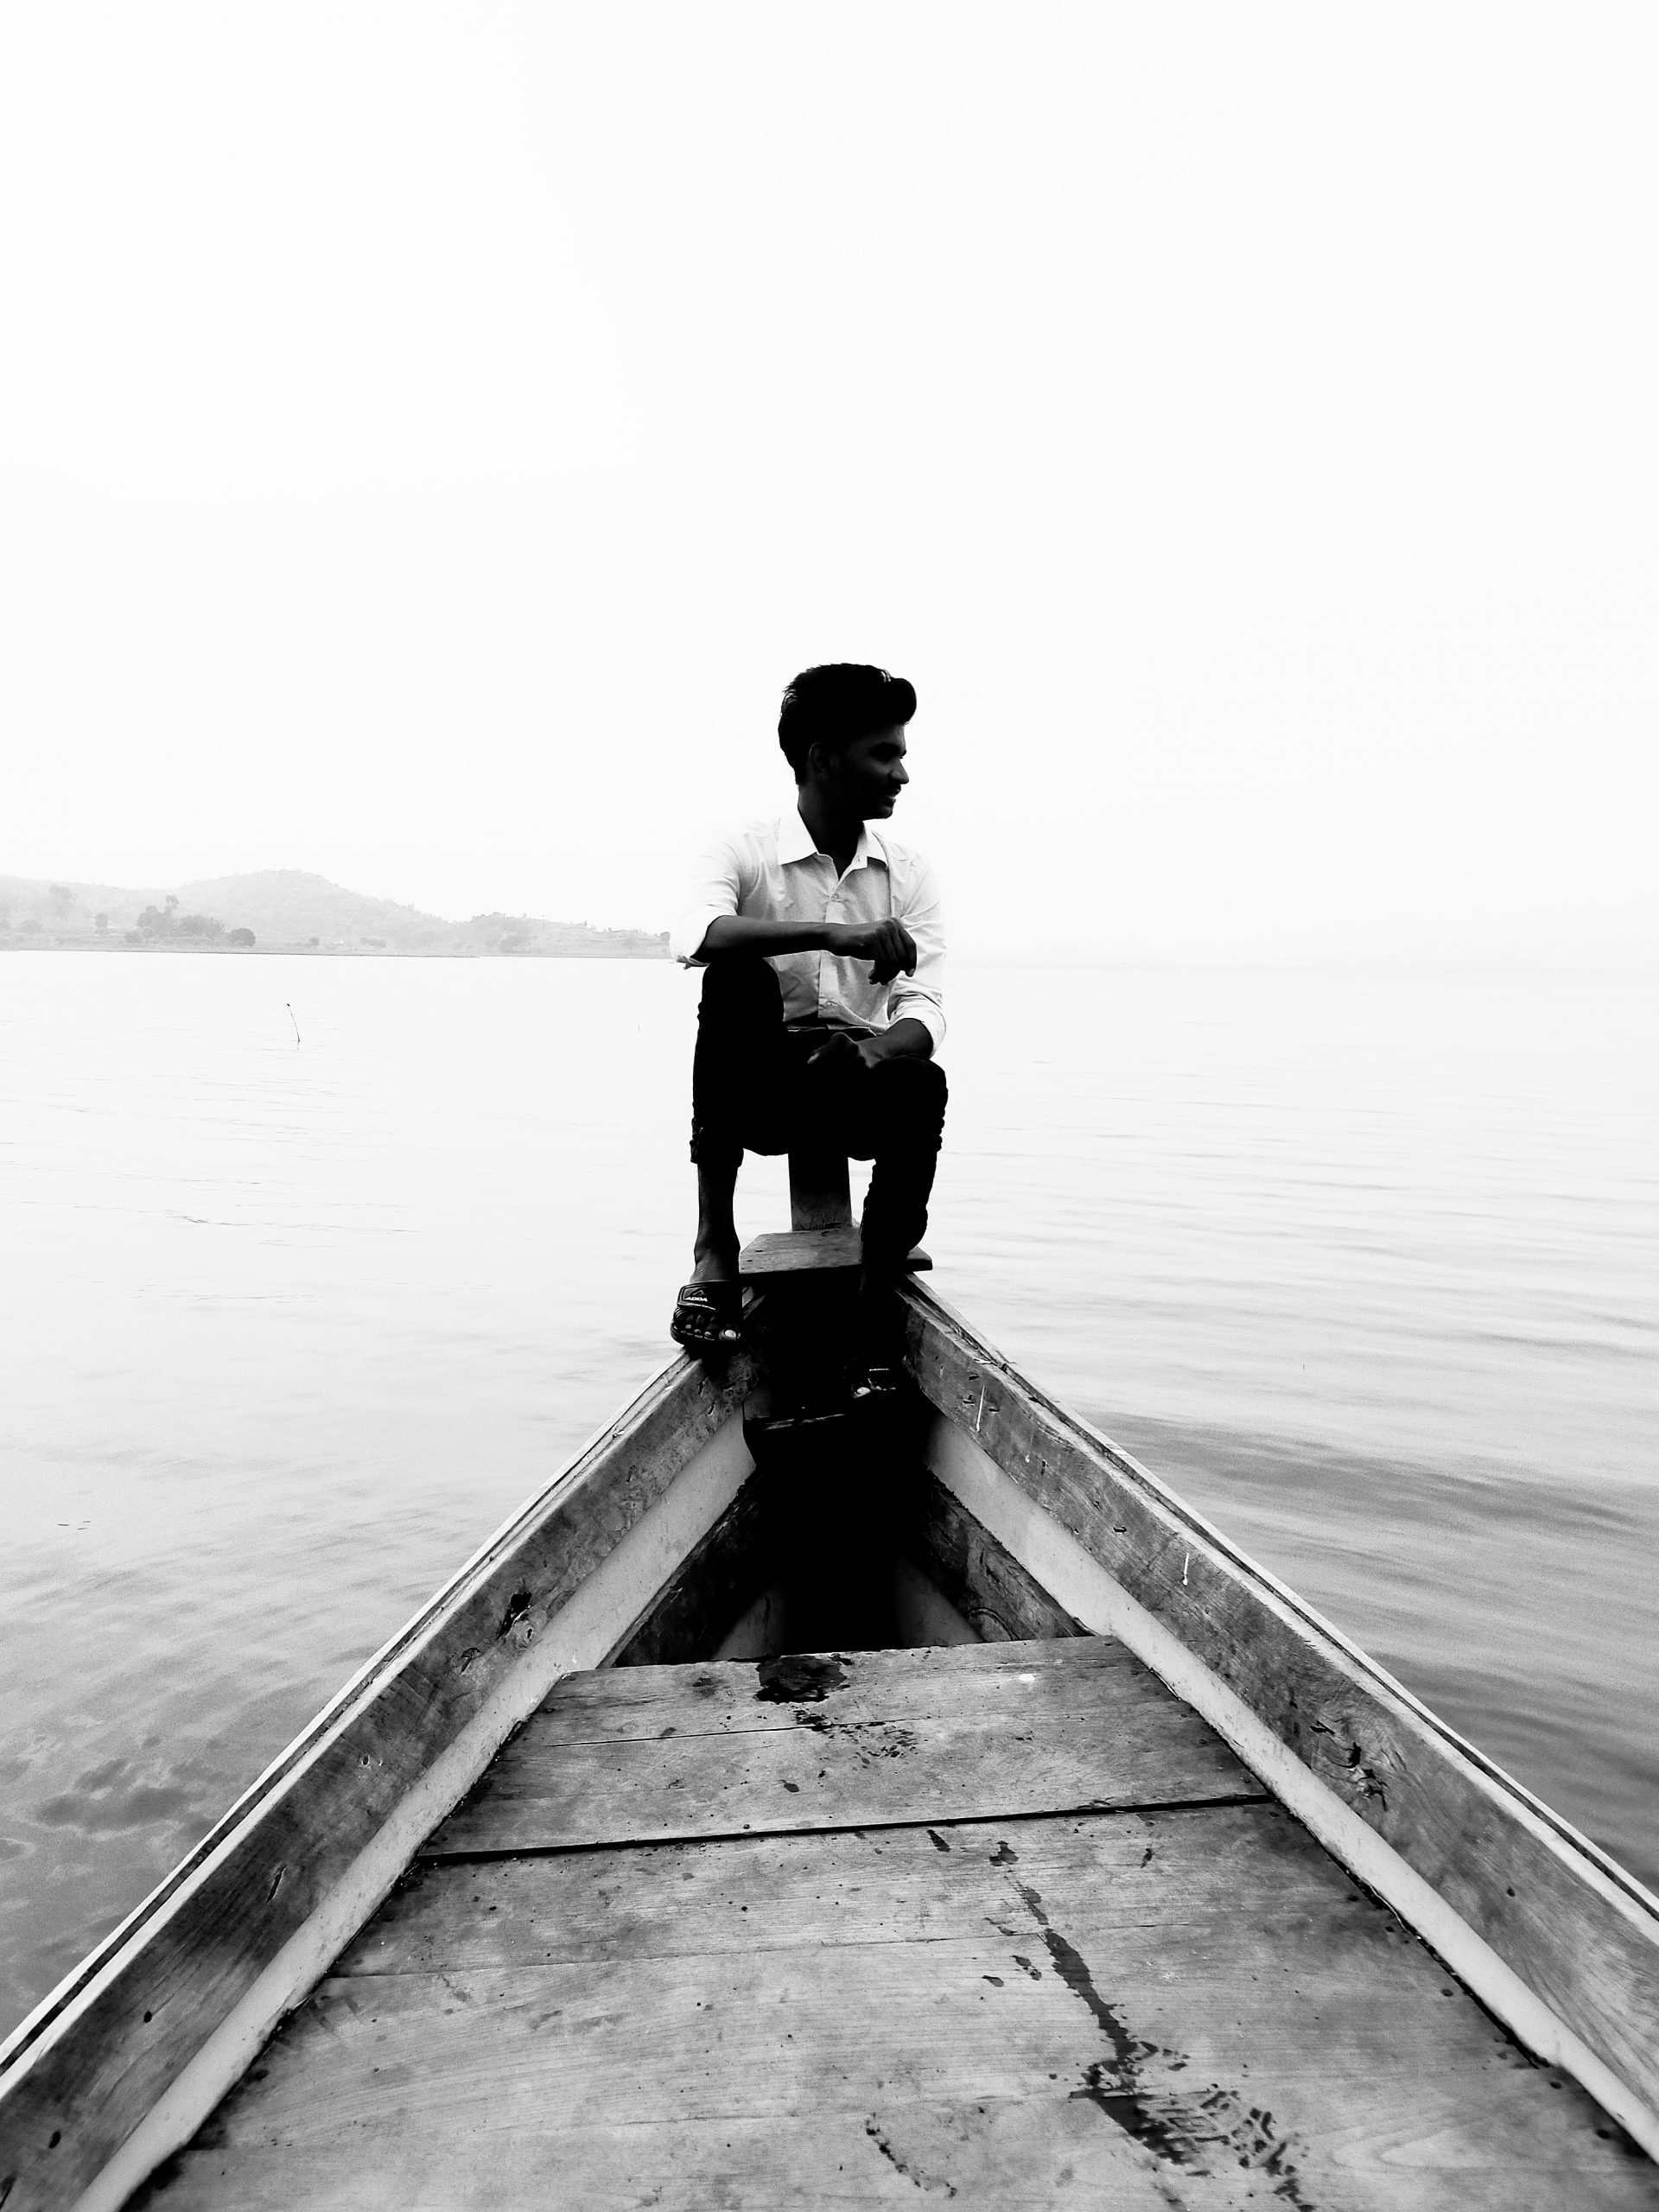 A young boy on a boat